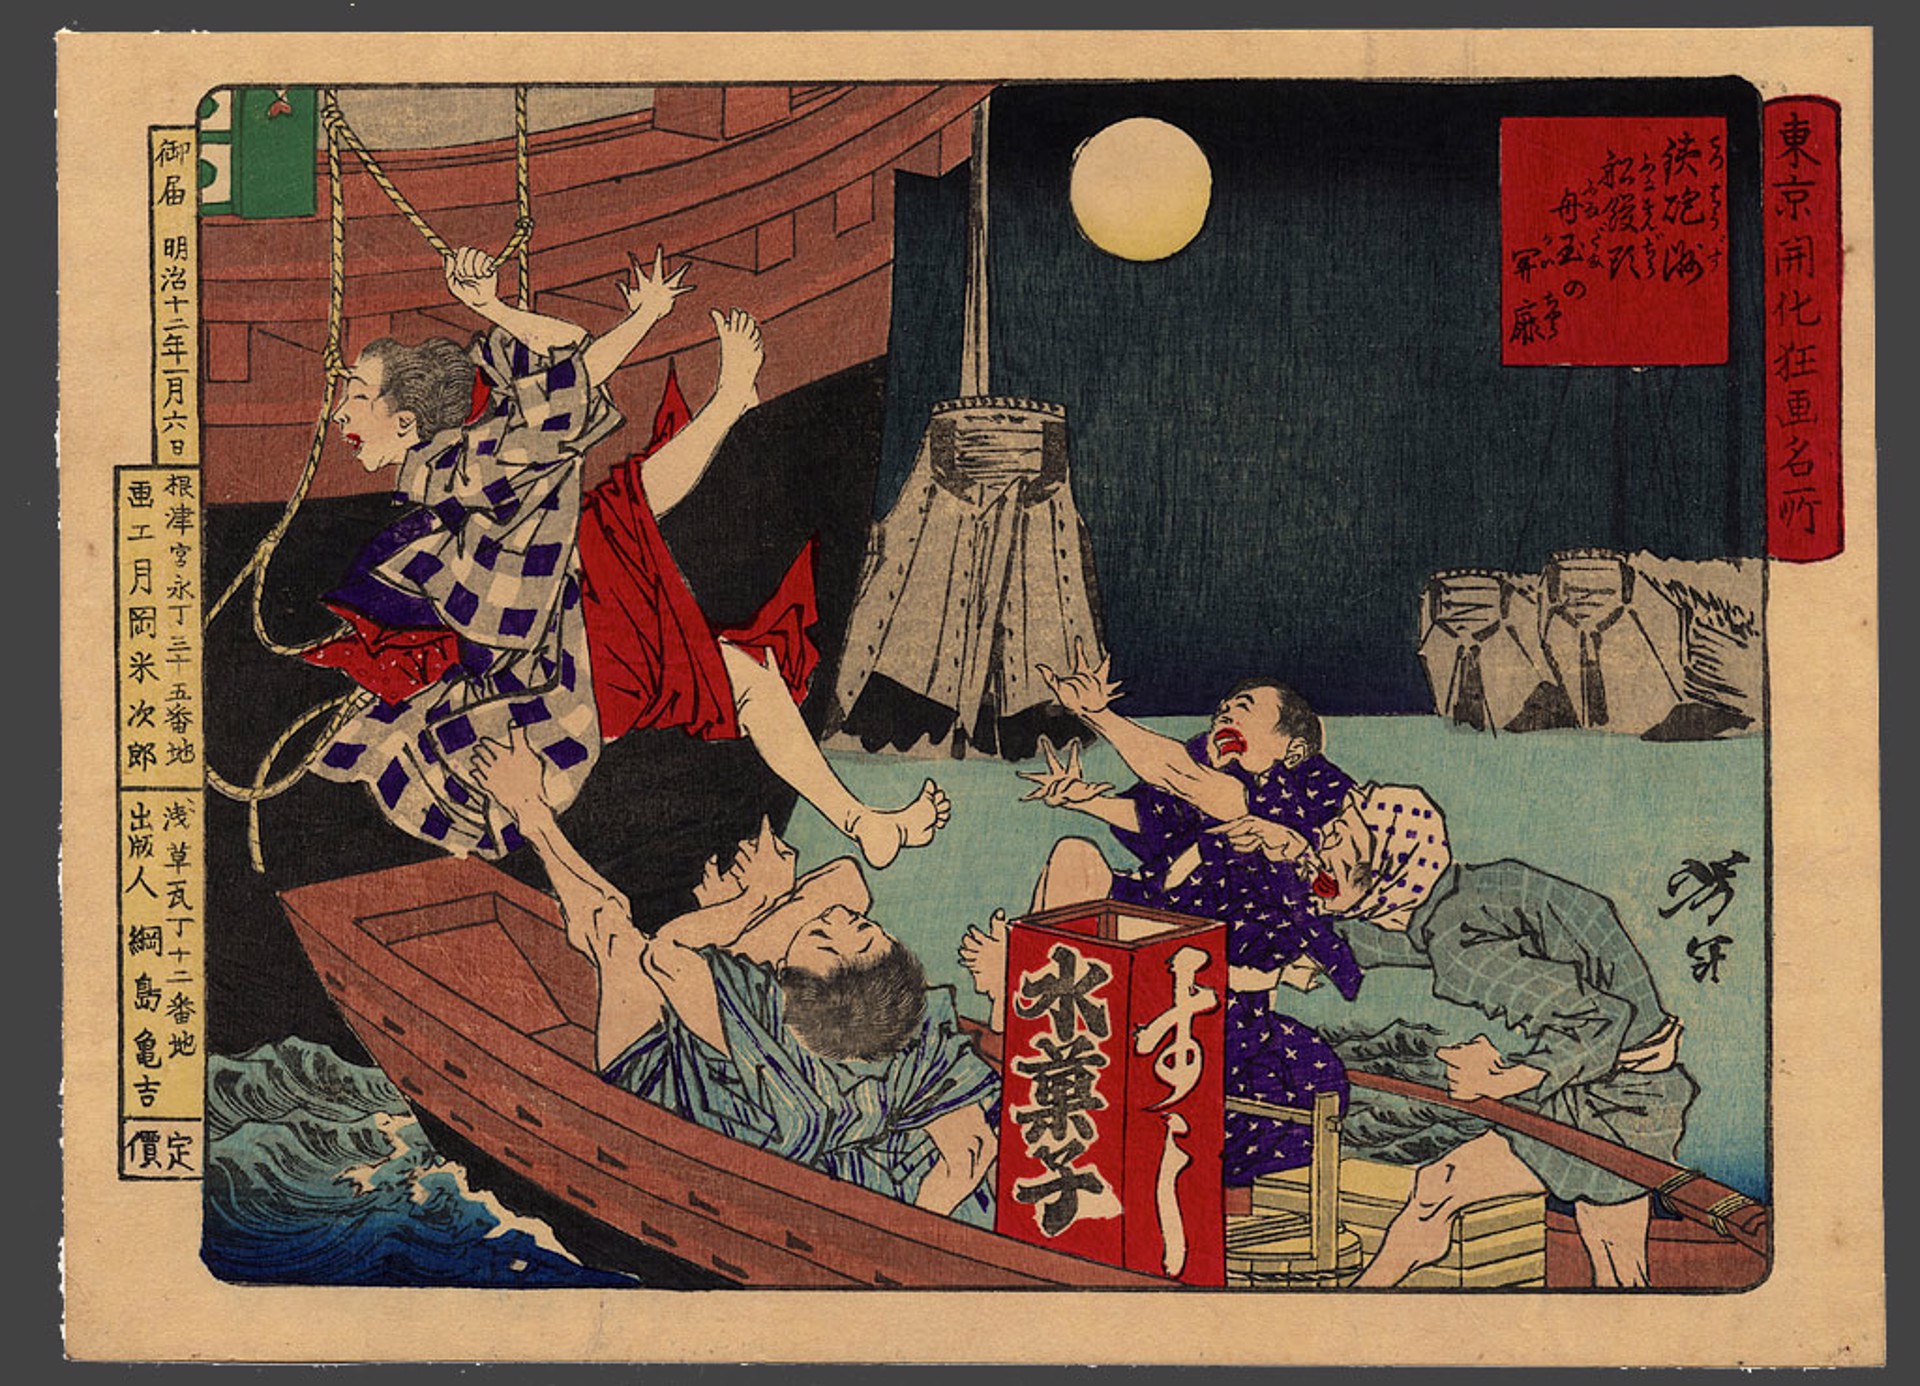 A boat prostitute is open for business at Teppozu Comic pictures of famous places amid the civiization of Tokyo by Yoshitoshi